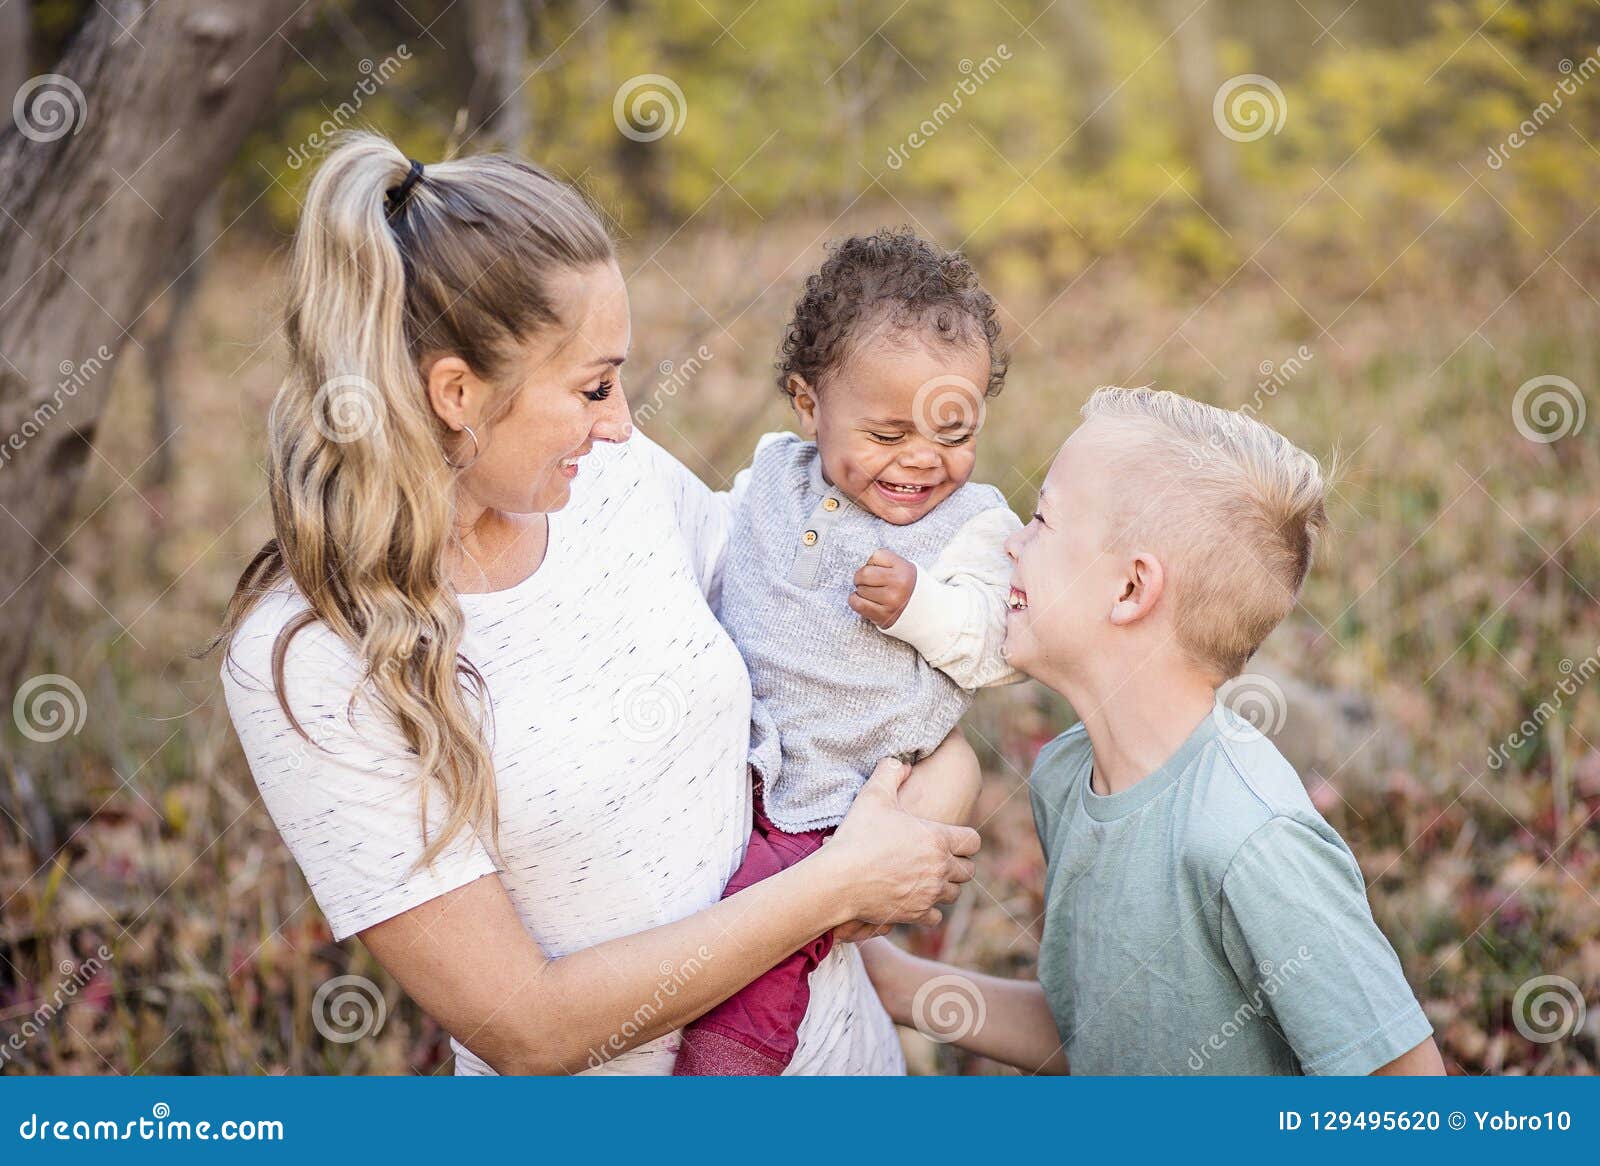 beautiful candid portrait of a mother playing with her cute bi-racial sons